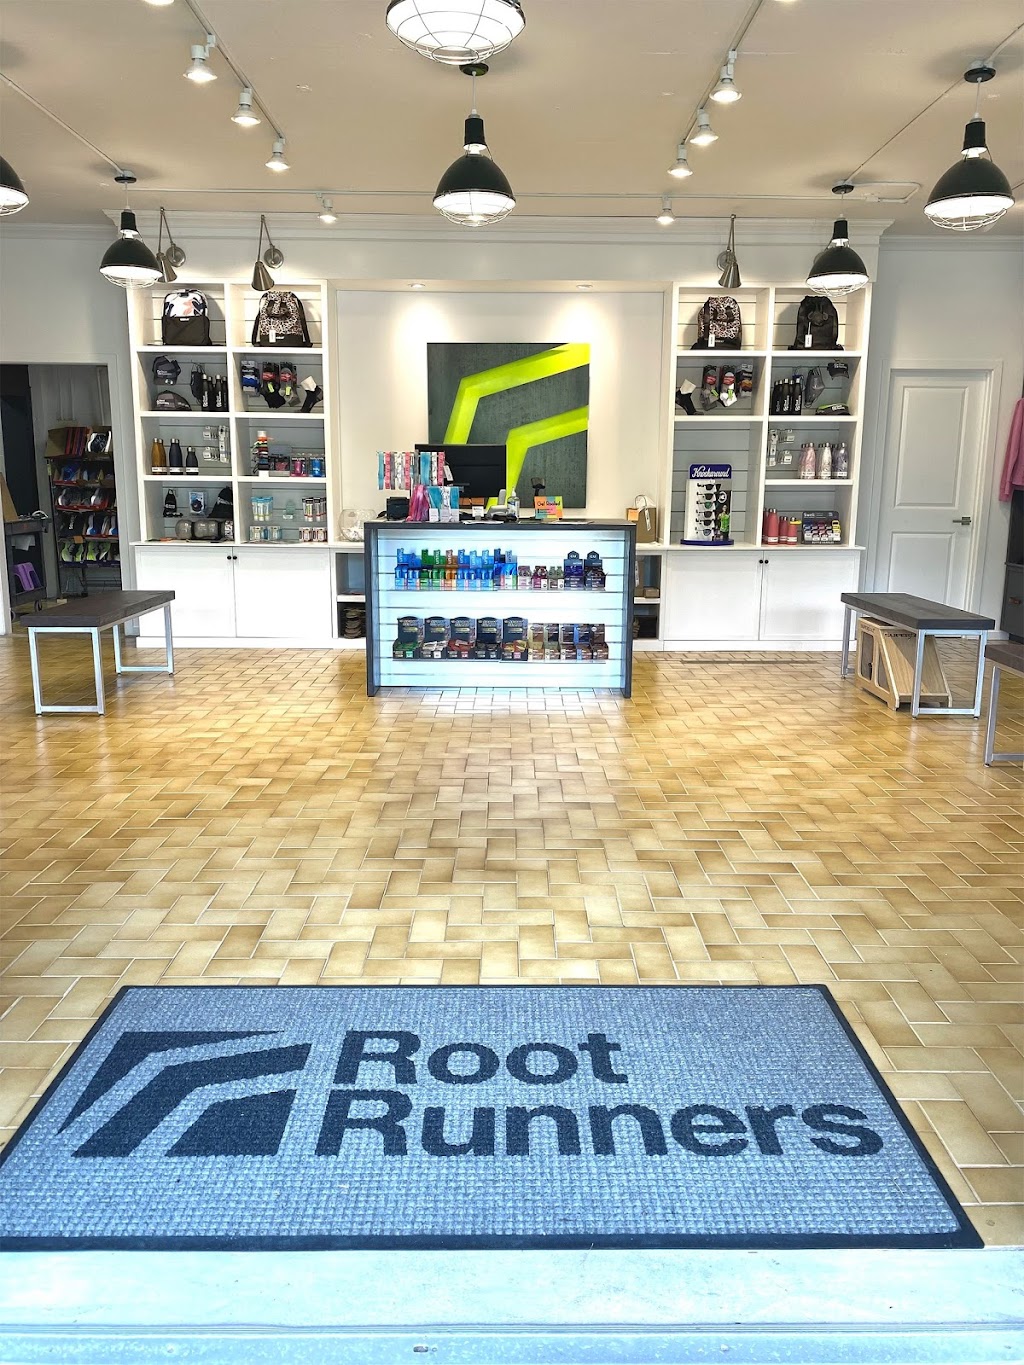 Root Runners | Run Specialty Shop | 270 Sparta Ave Suite 106, Sparta Township, NJ 07871 | Phone: (973) 512-3747